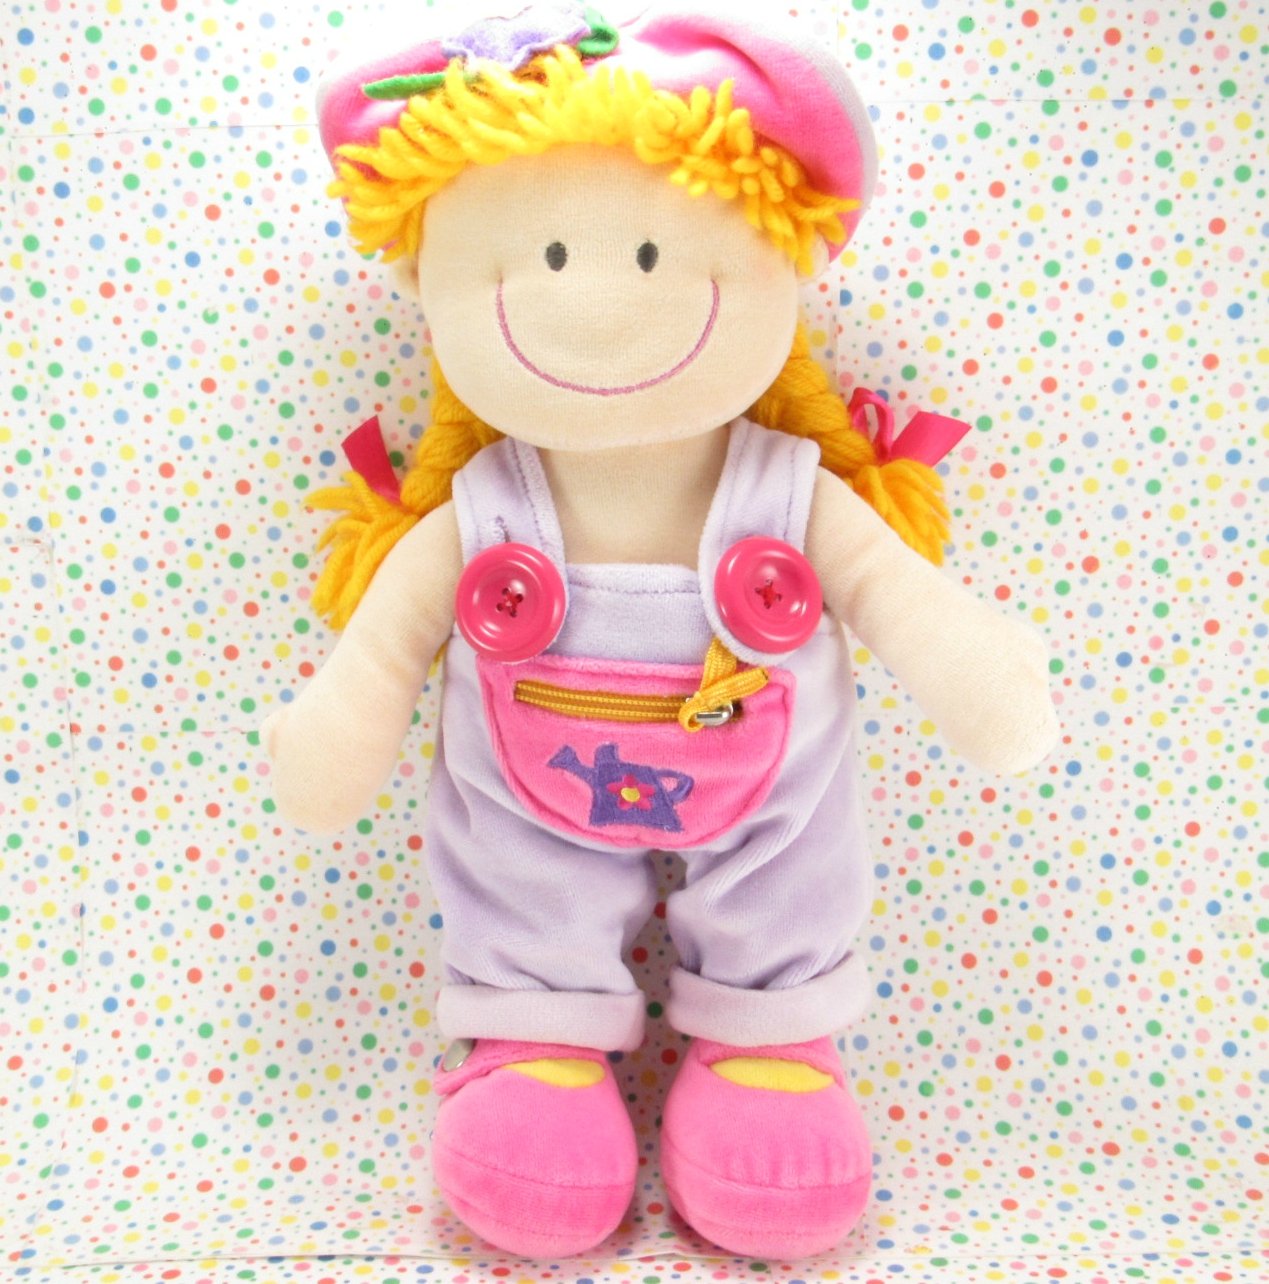 dress me doll for toddlers